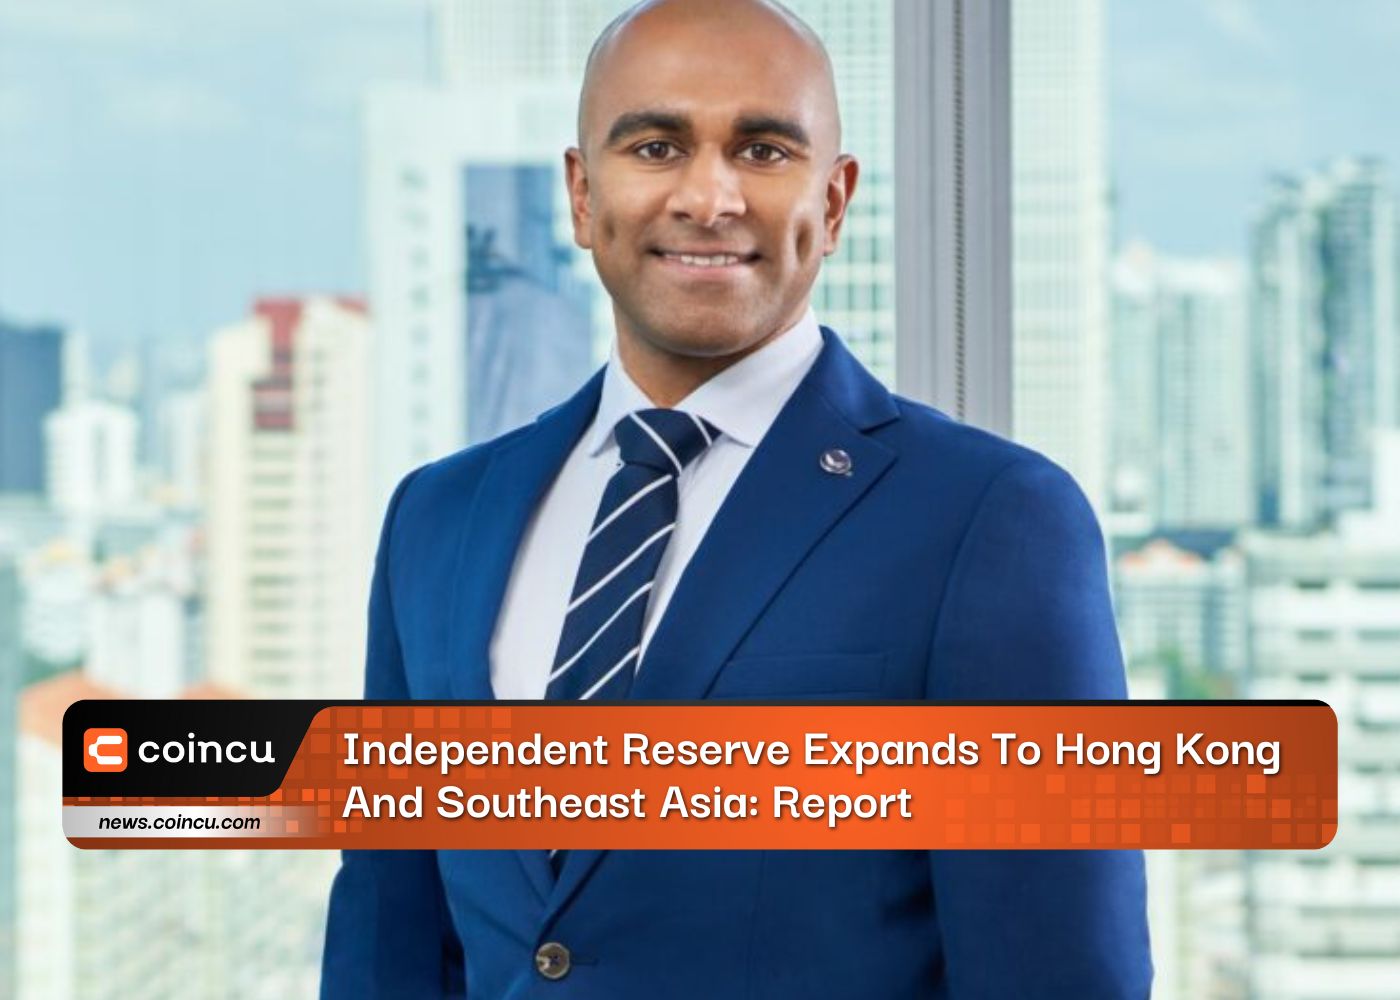 Independent Reserve Expands To Hong Kong And Southeast Asia: Report